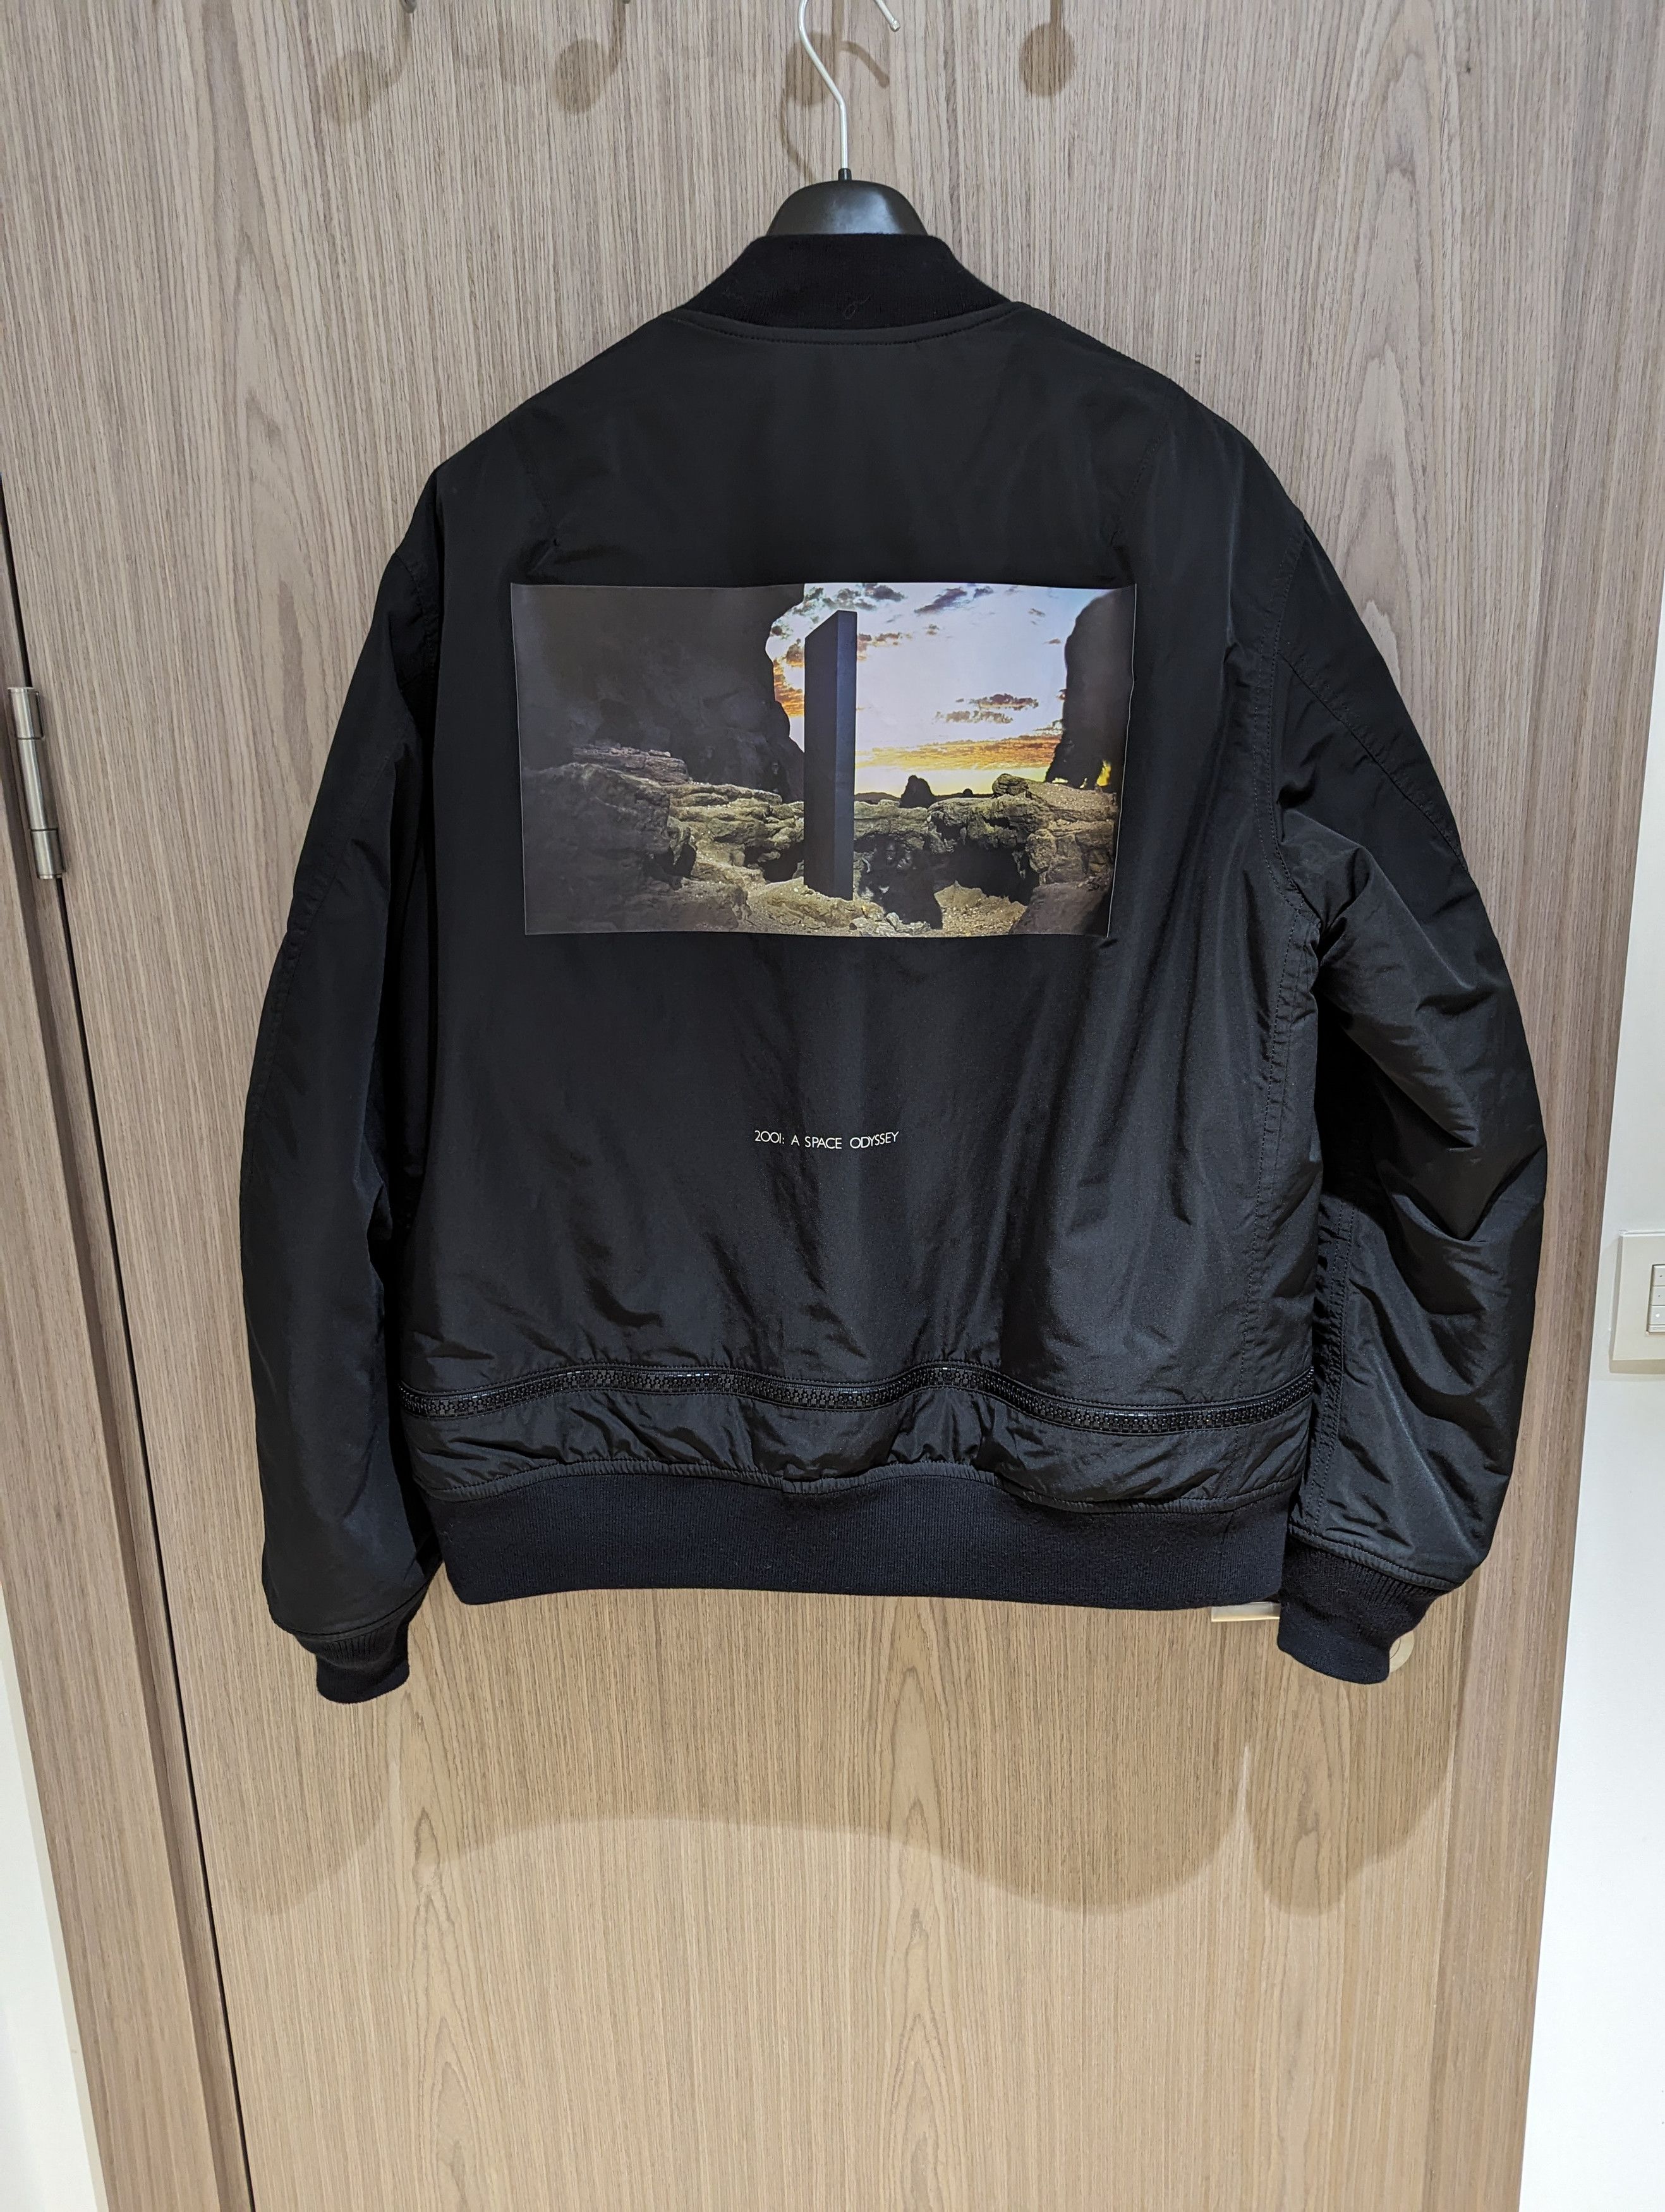 Undercover 2001 | Grailed